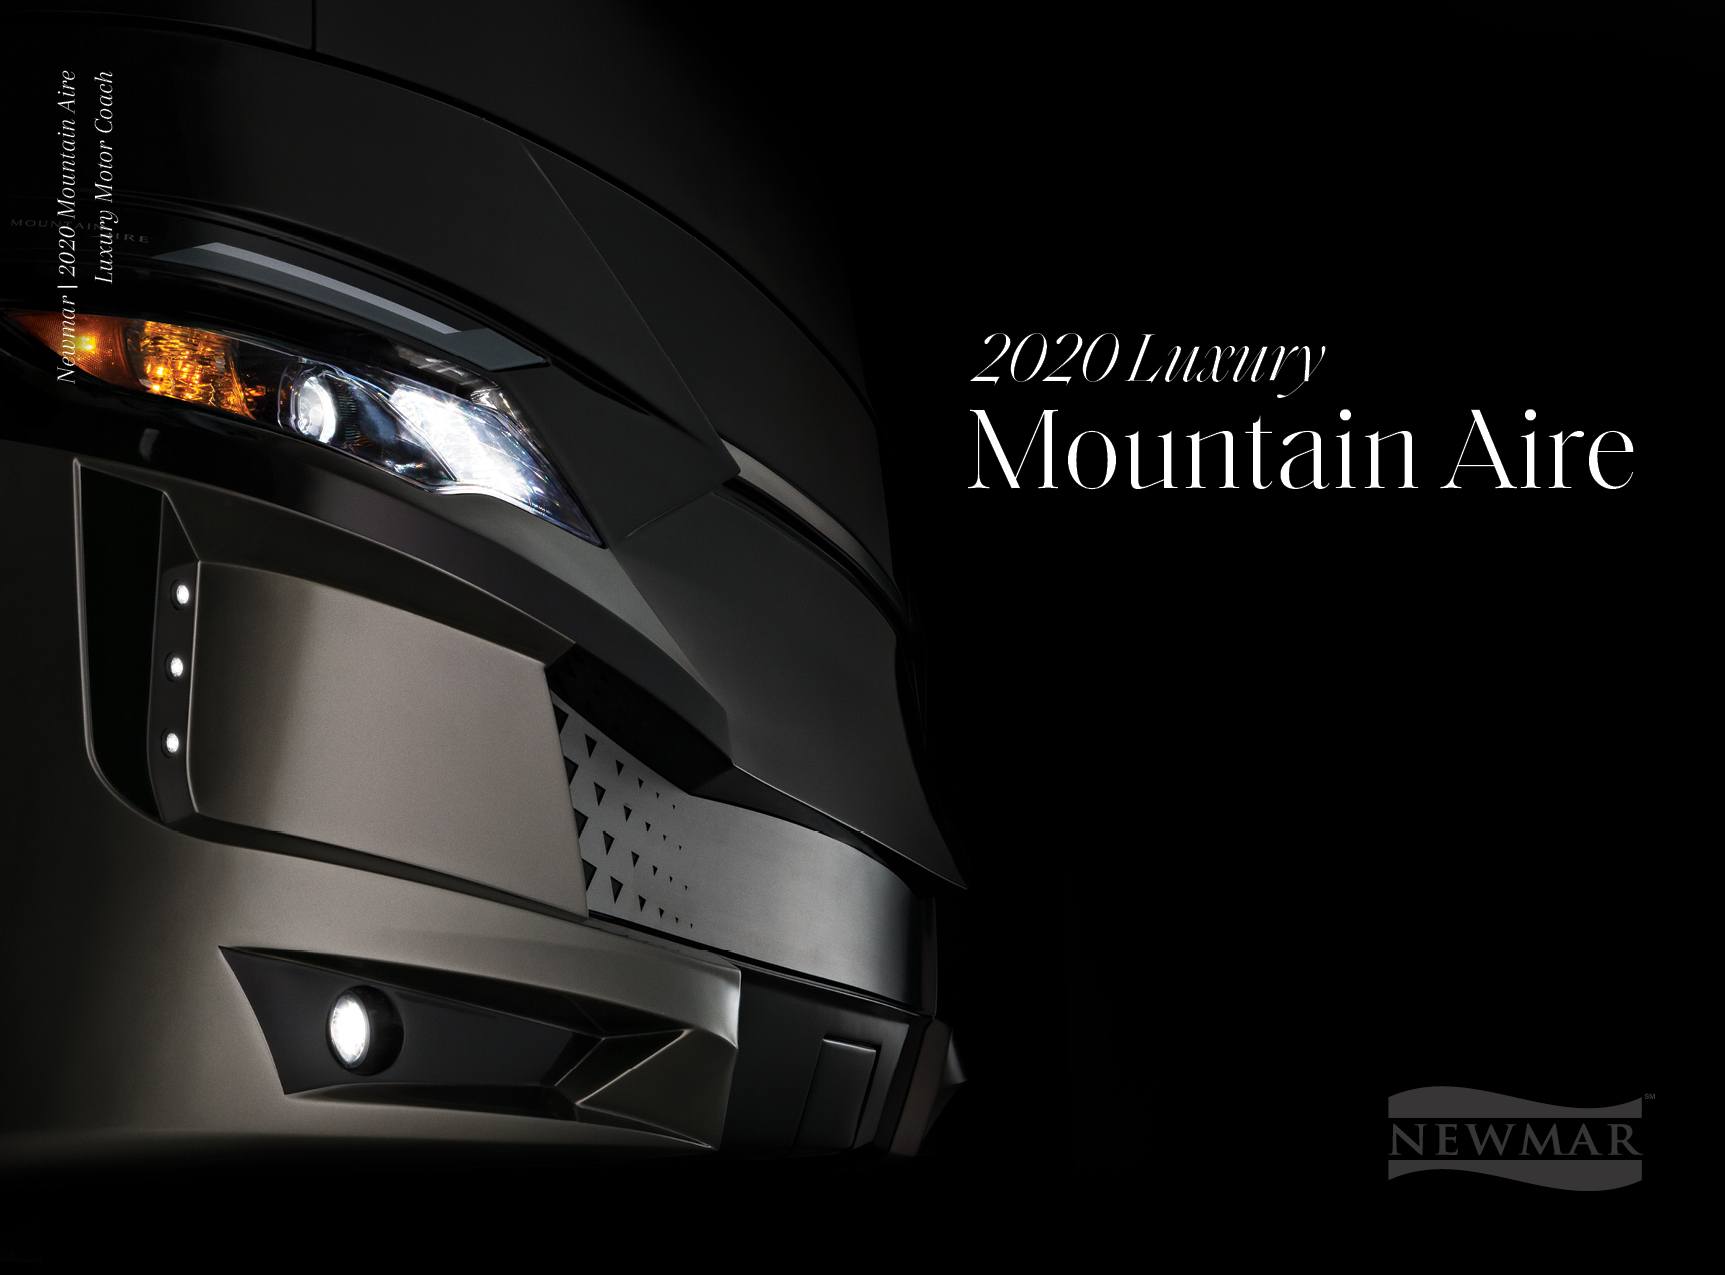 2020 Mountain Aire